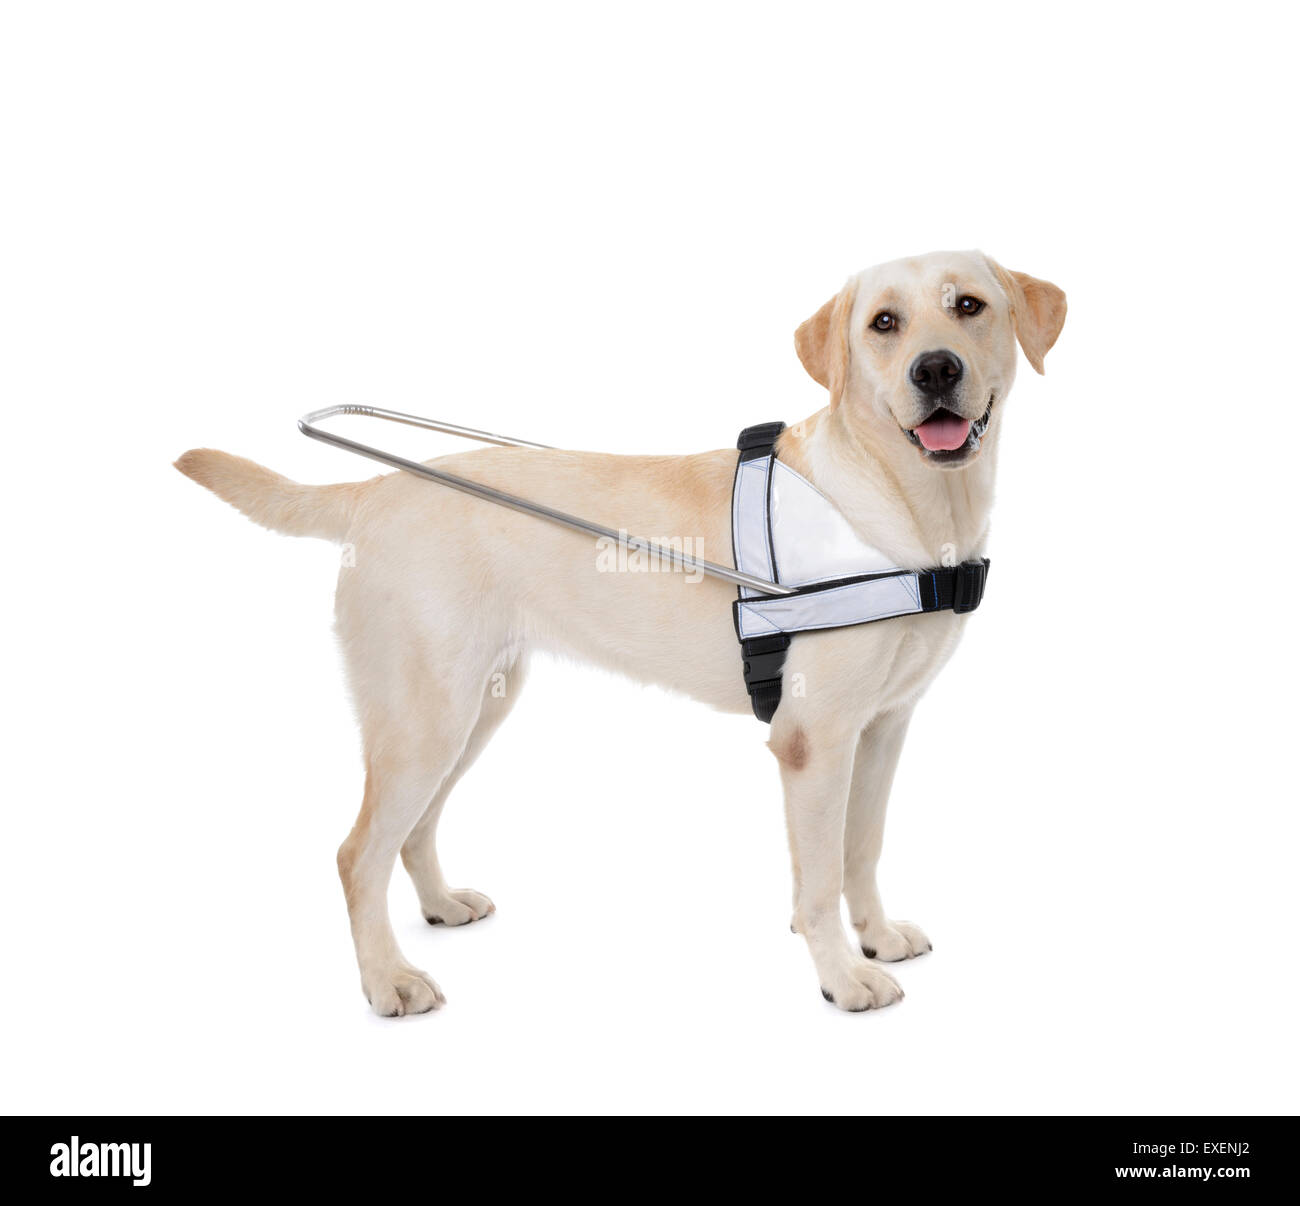 how much does a guide dog for the blind cost